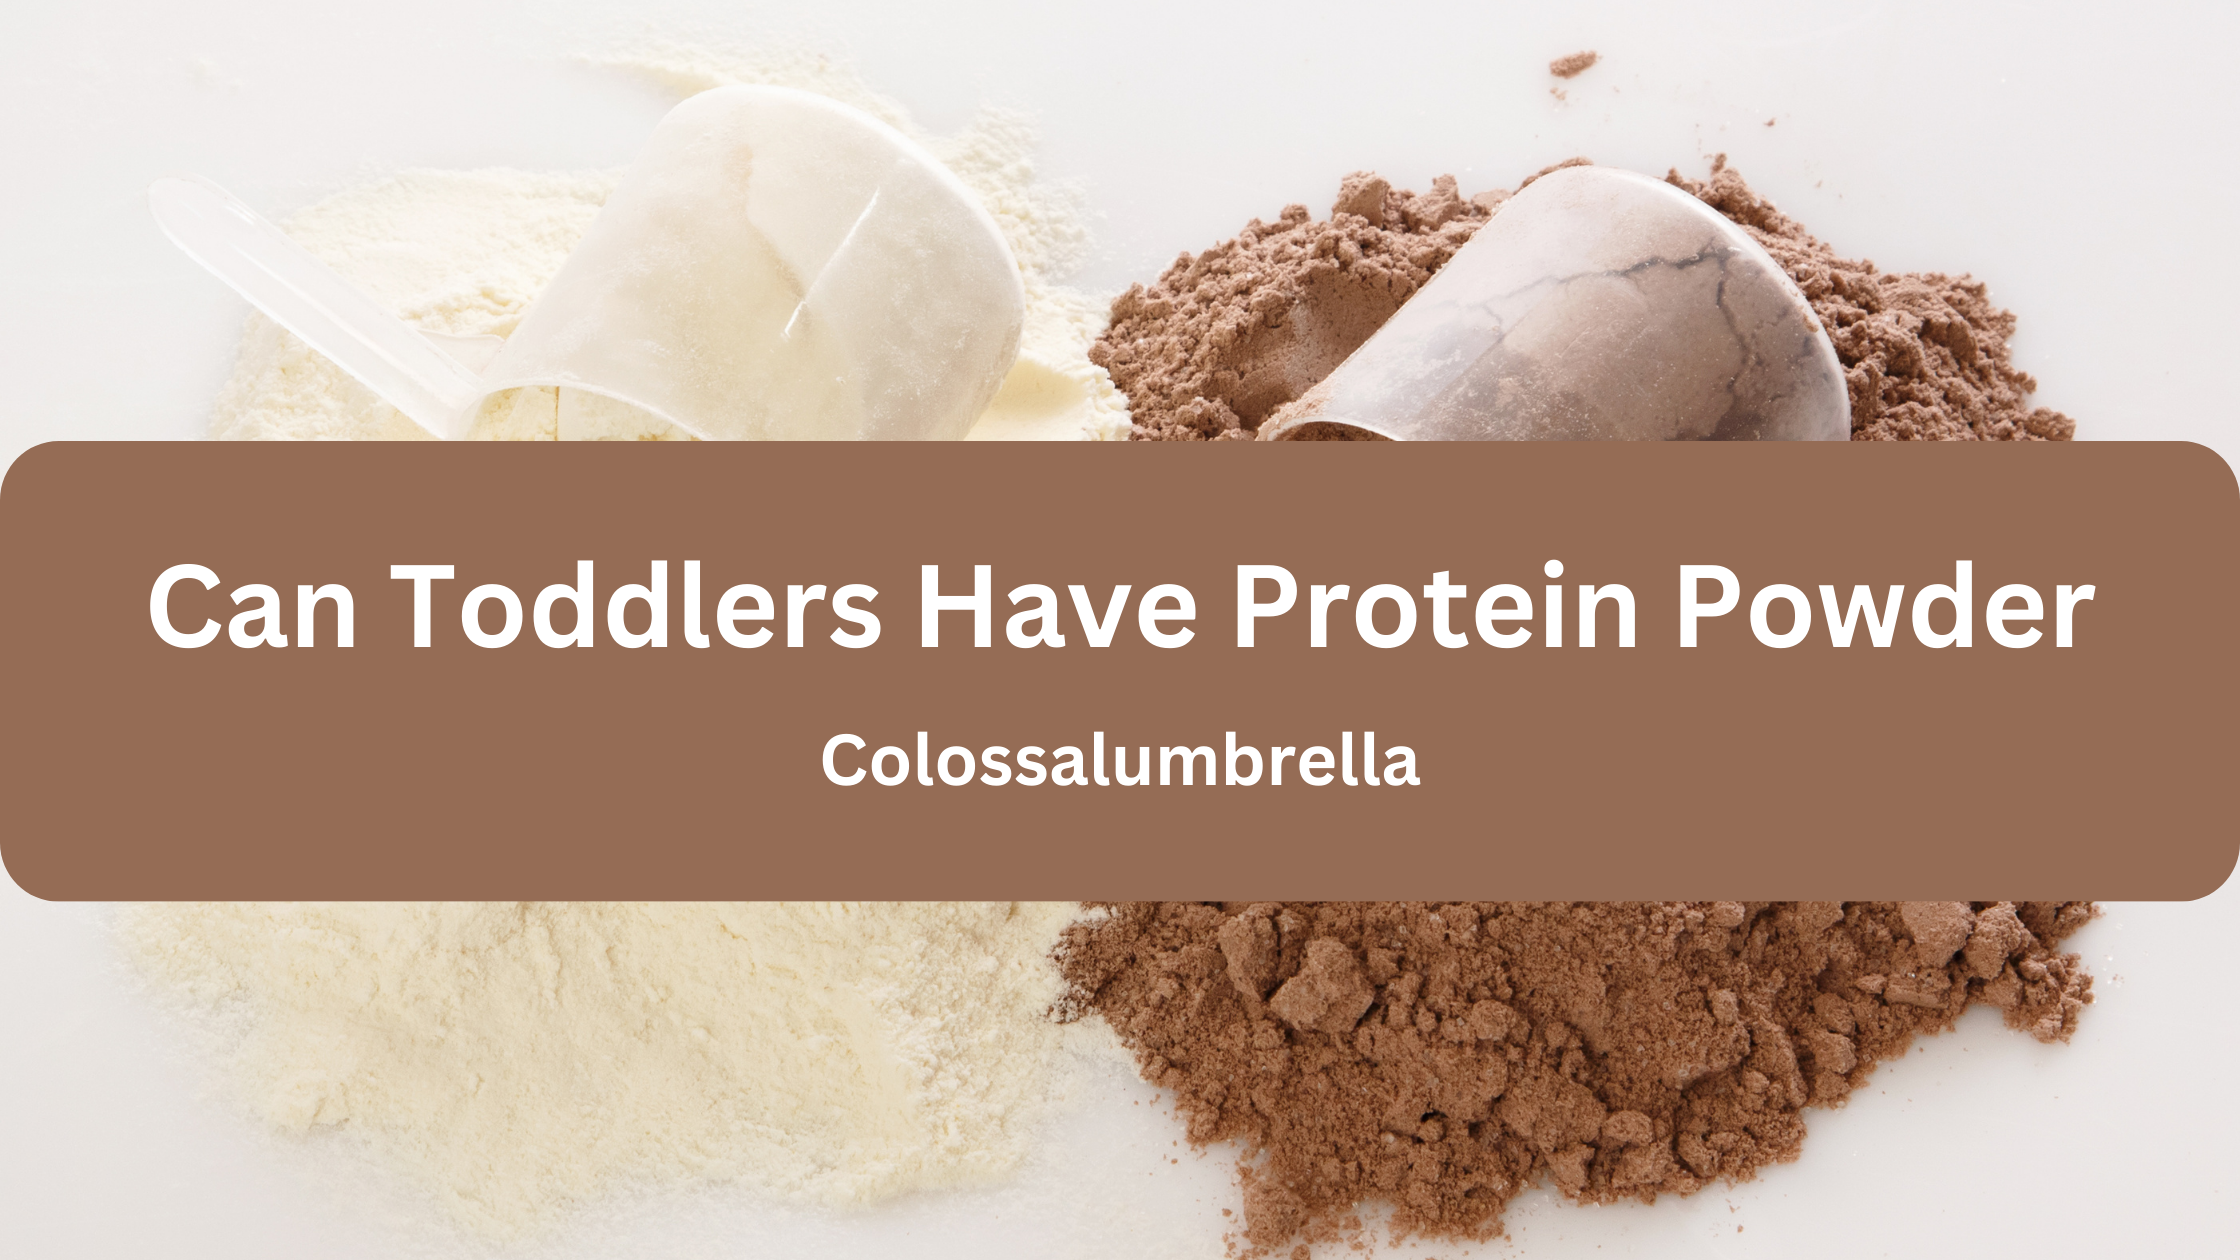 Can Toddlers Have Protein Powder? 4 Potential Risks